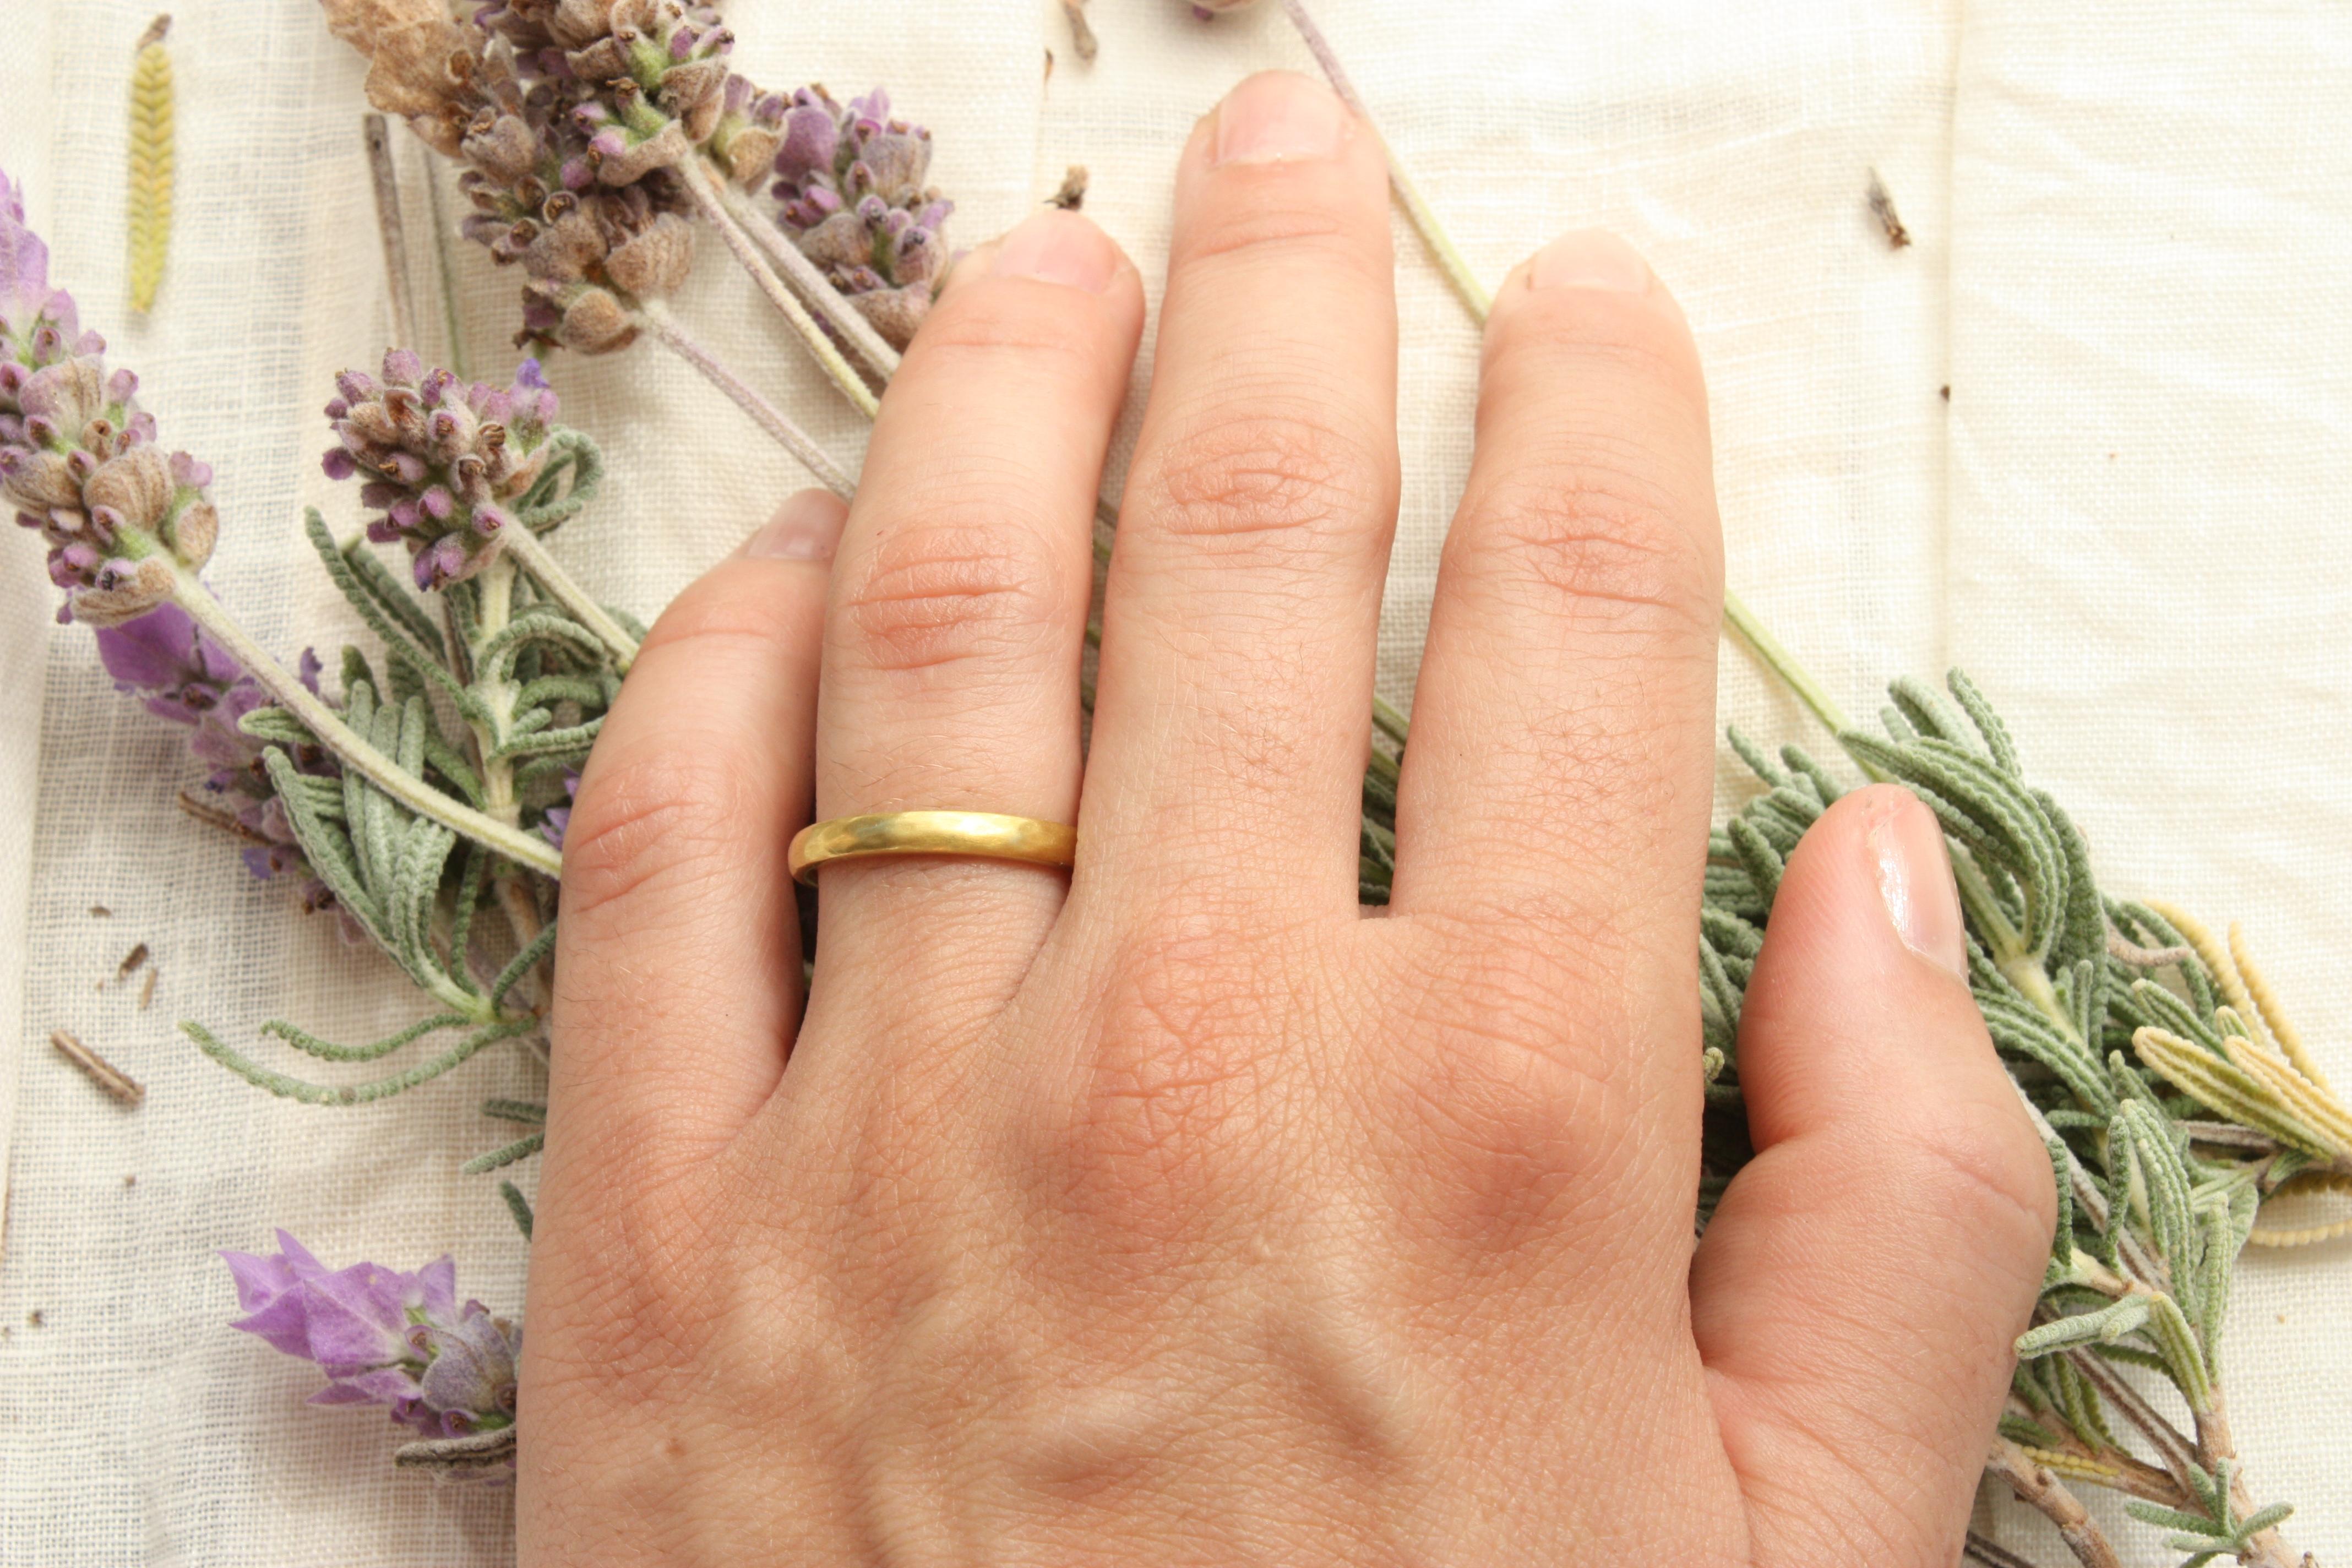 This thin 20k hammered gold wedding band is handcrafted from 100% natural California gold by Bracken Jewelers in Venice, California. Named 